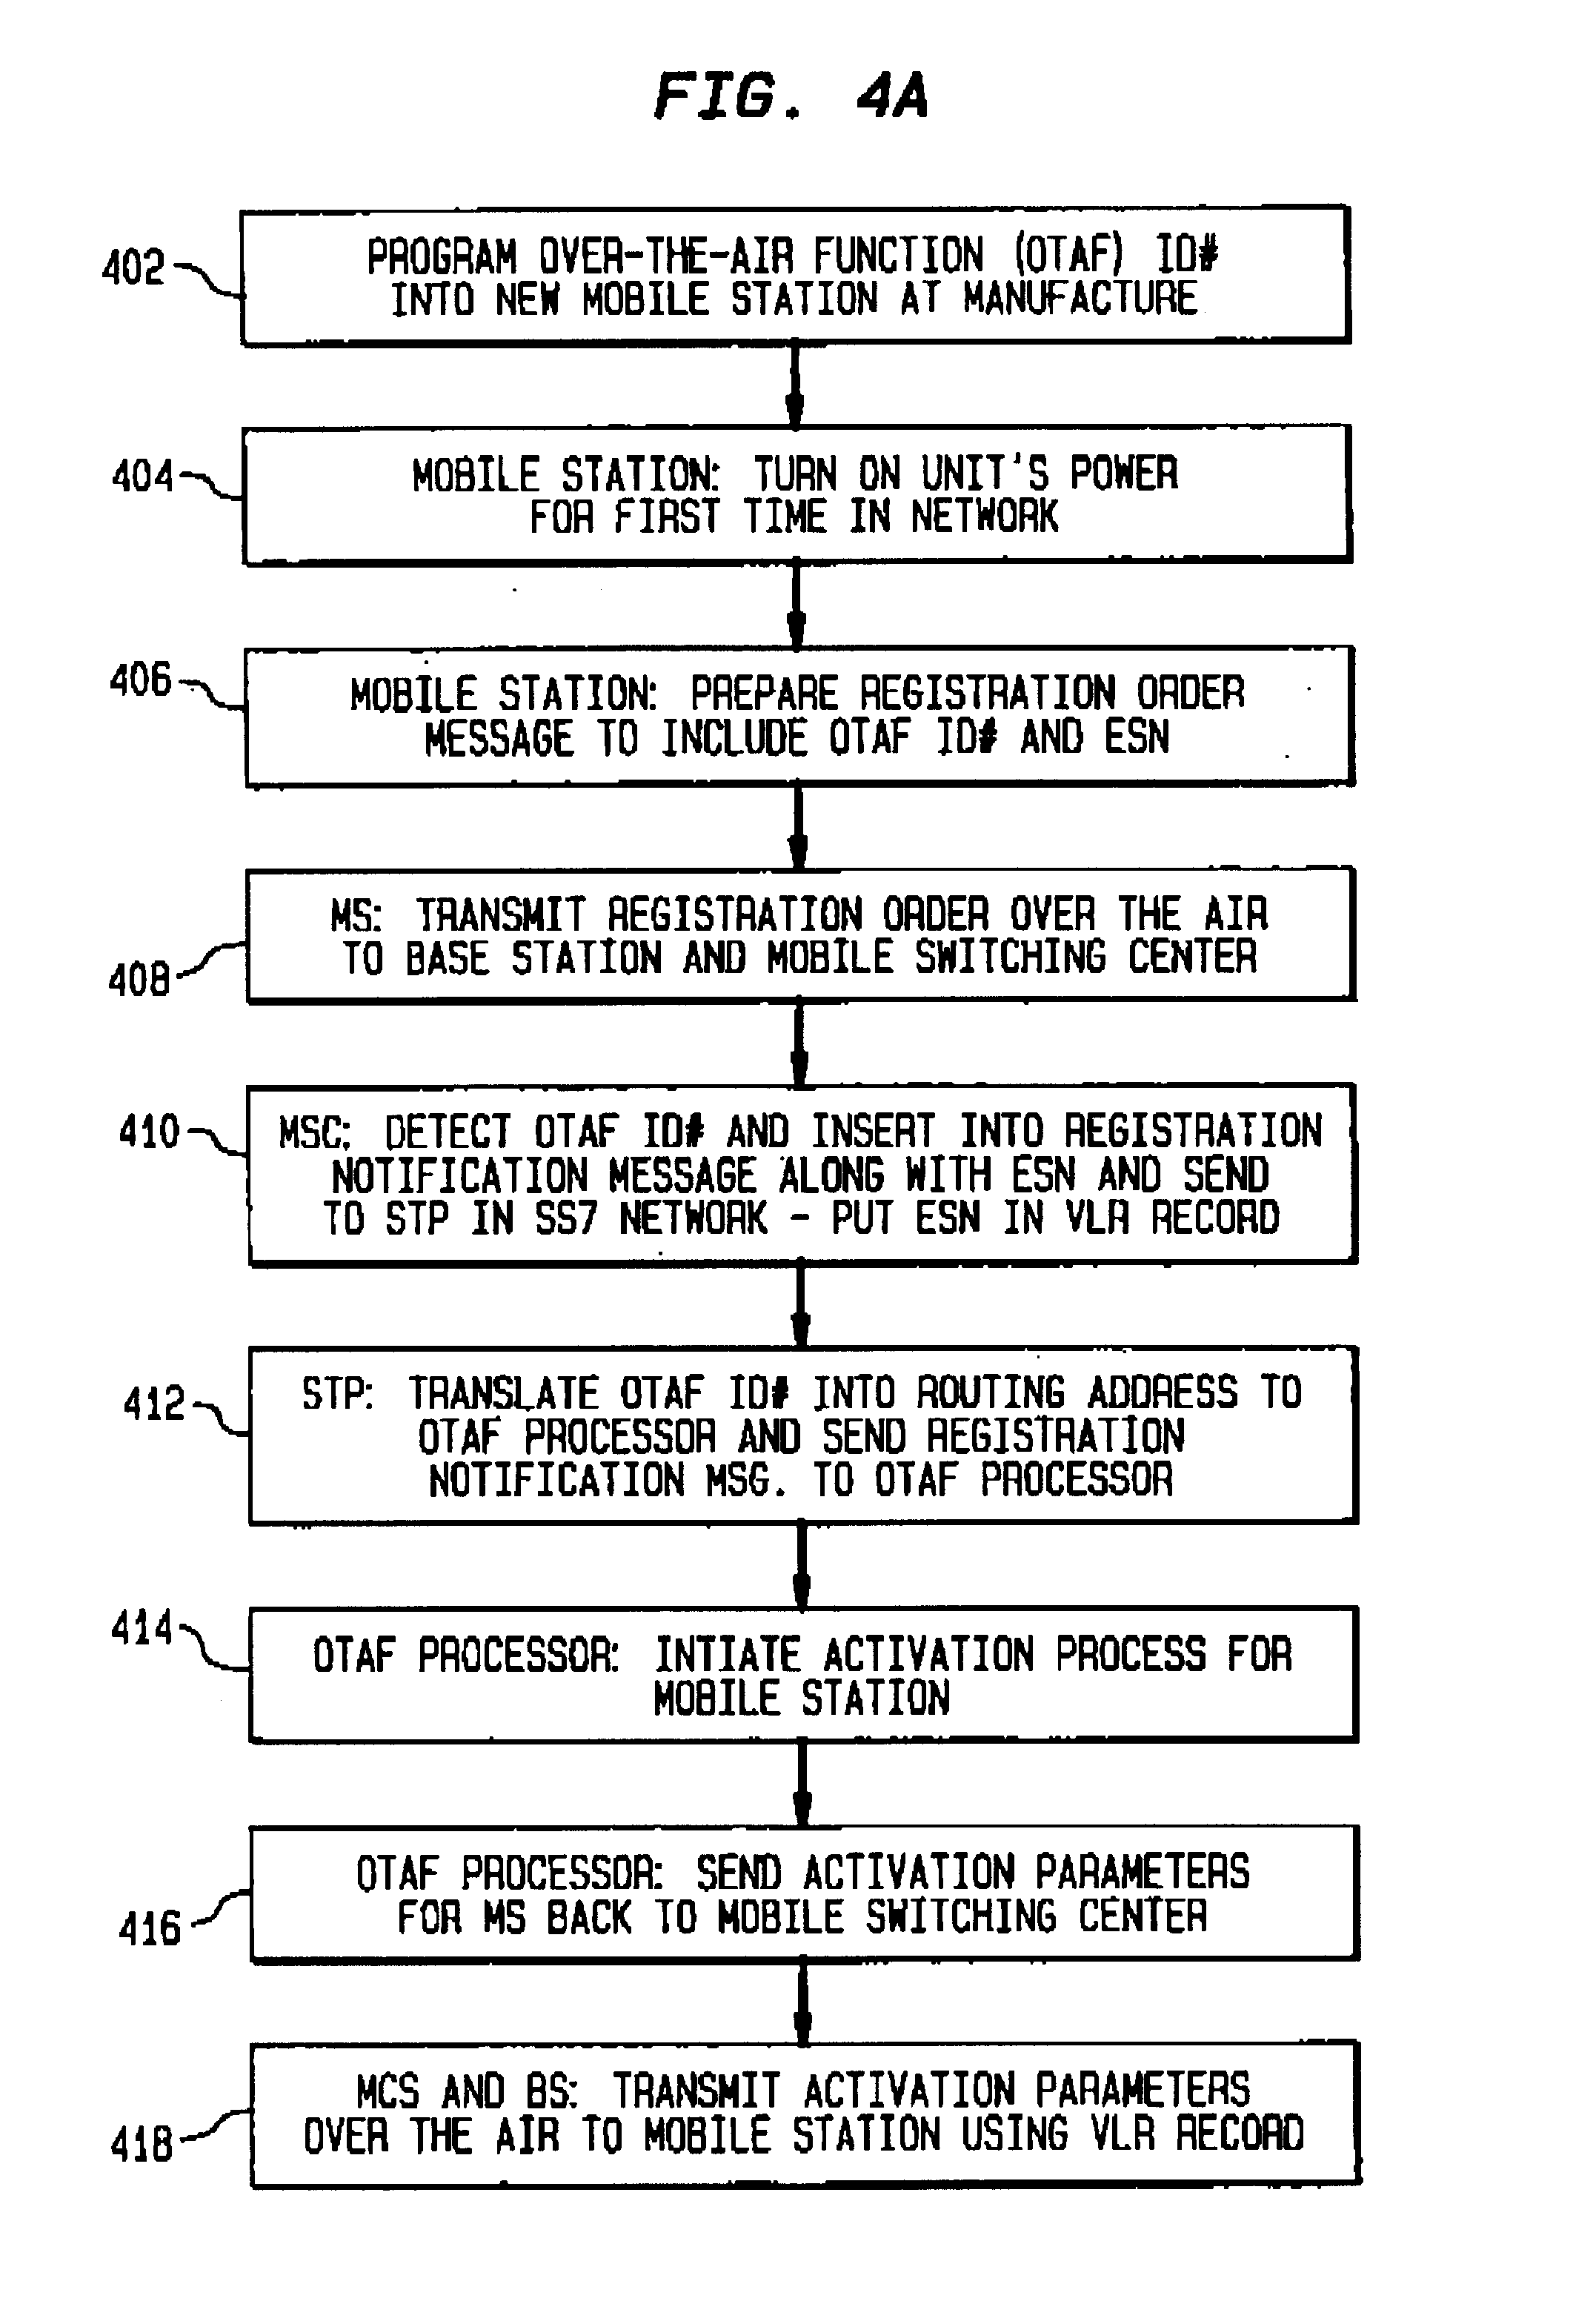 System and method for automatic registration notification for over-the-air activation